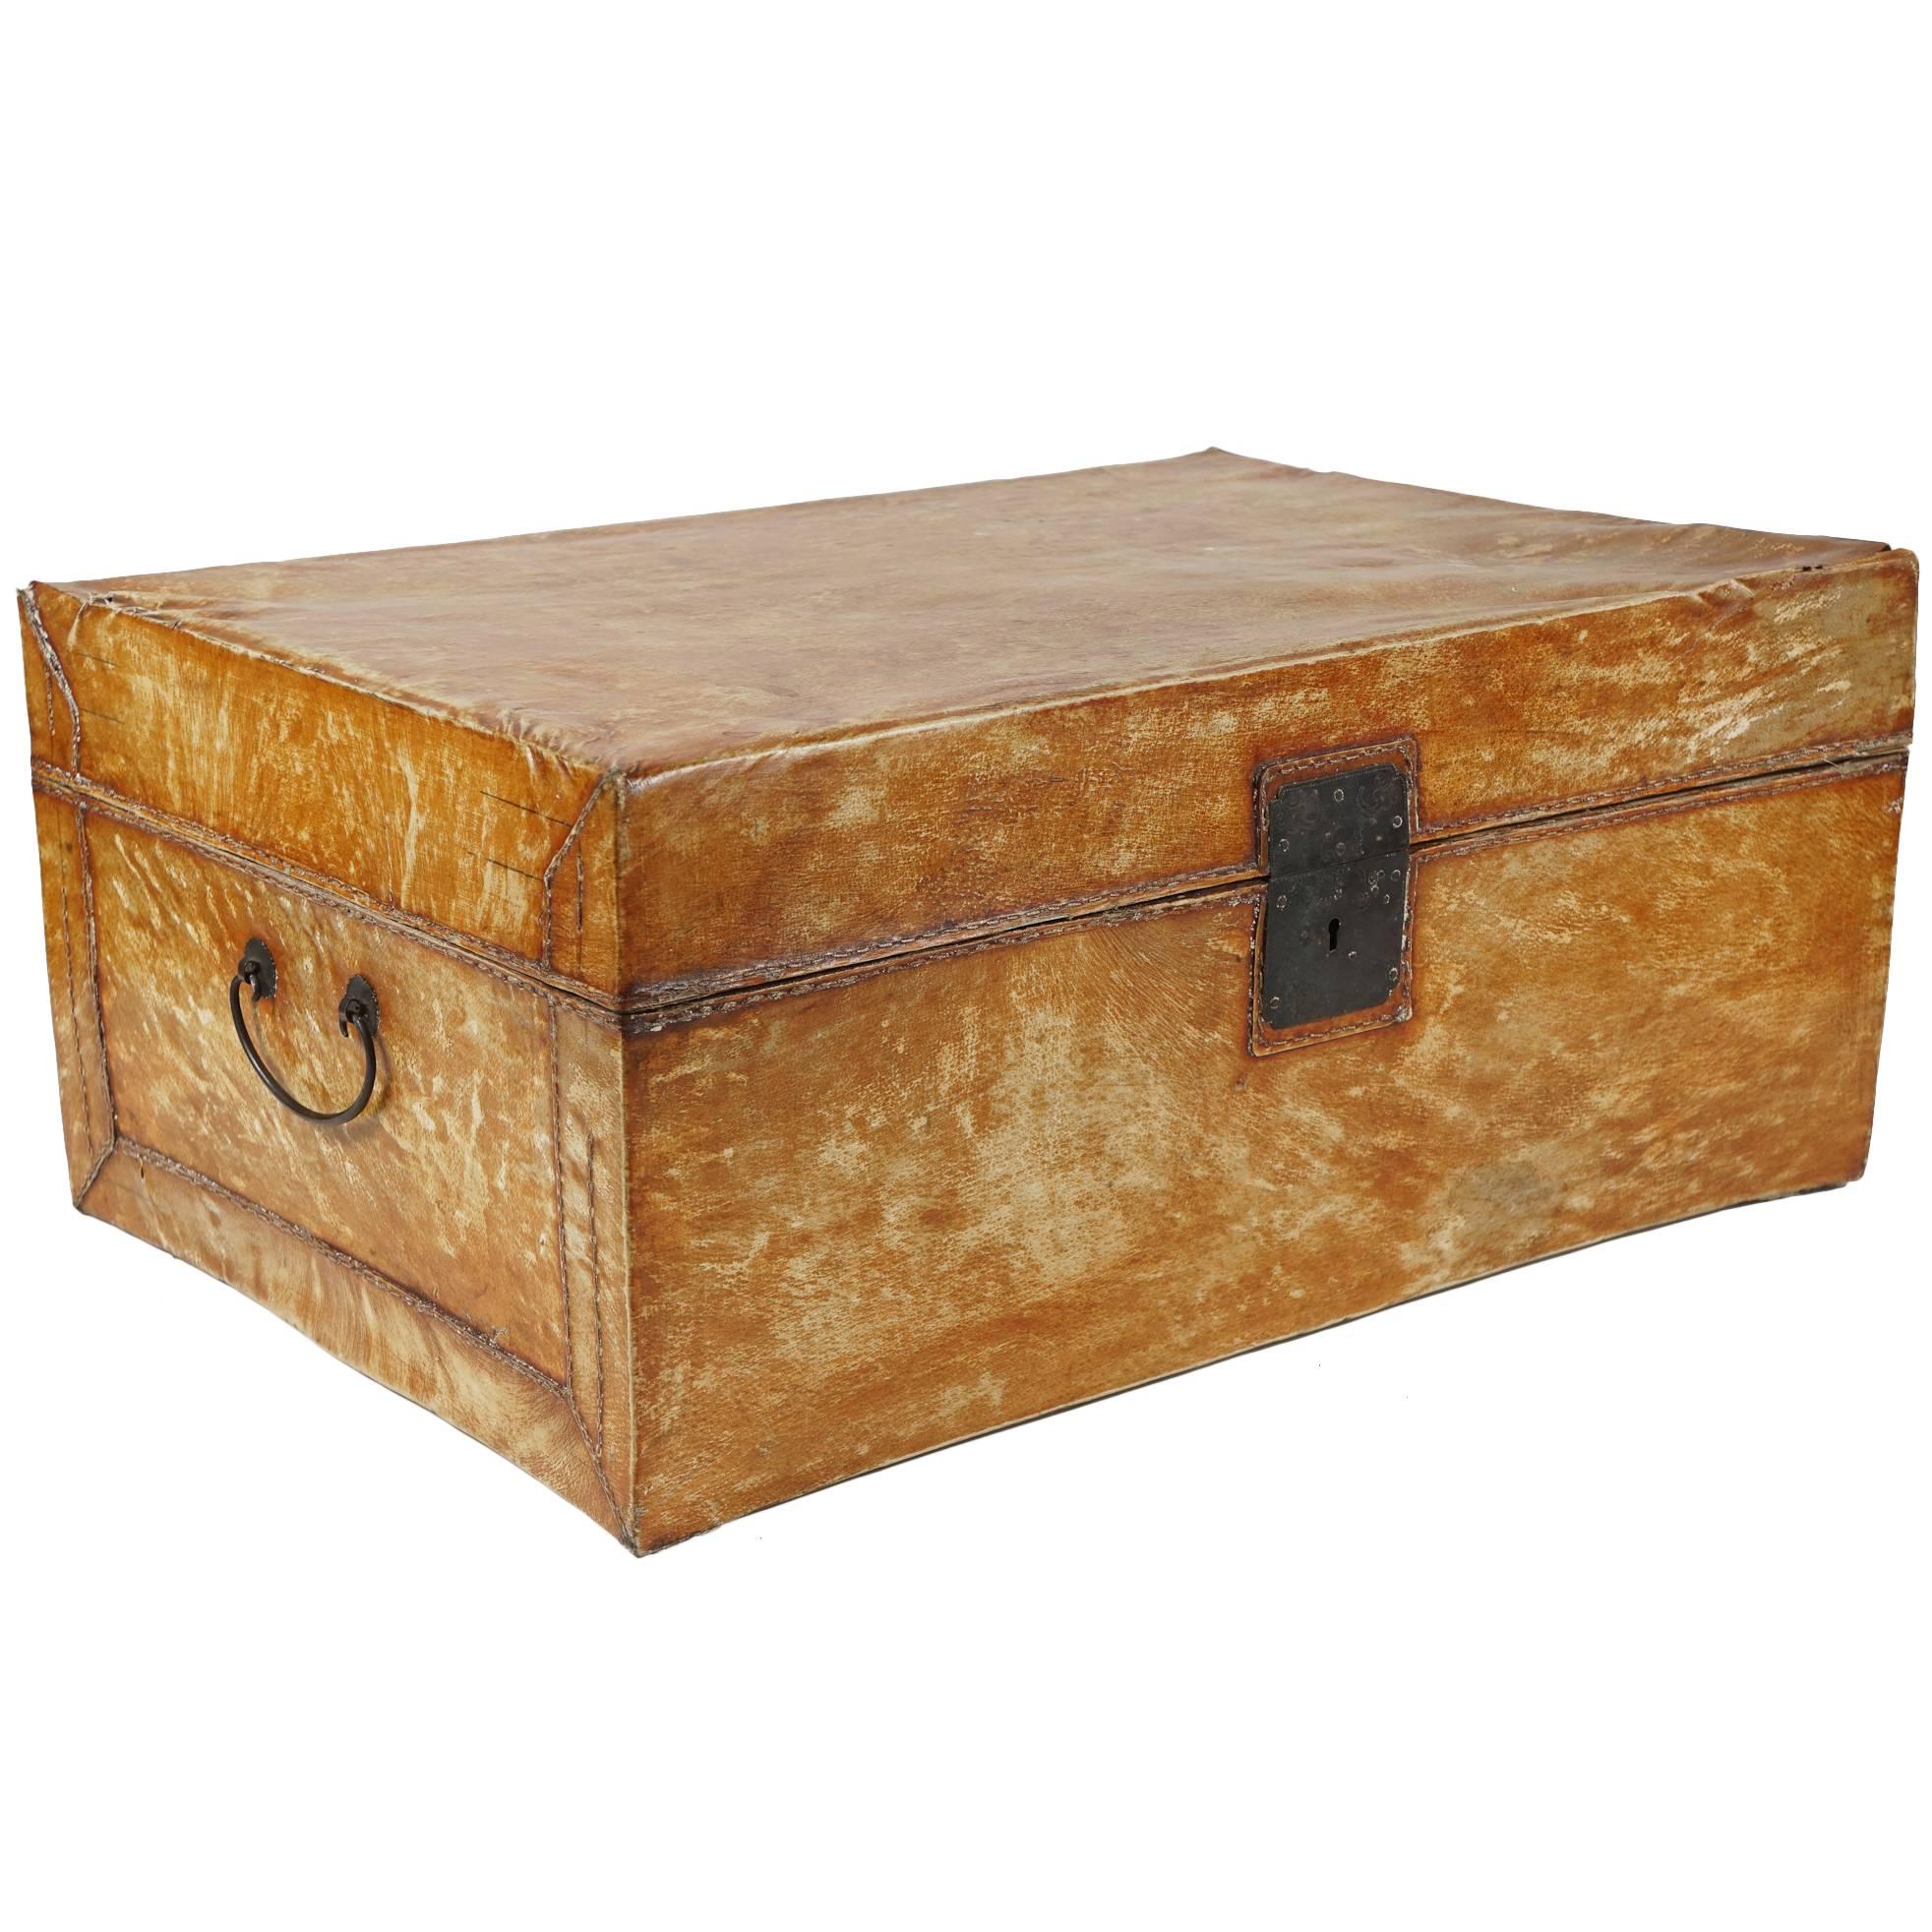 Camphor Wood and Pig Skin Covered Trunk from the Estate of Bunny Mellon